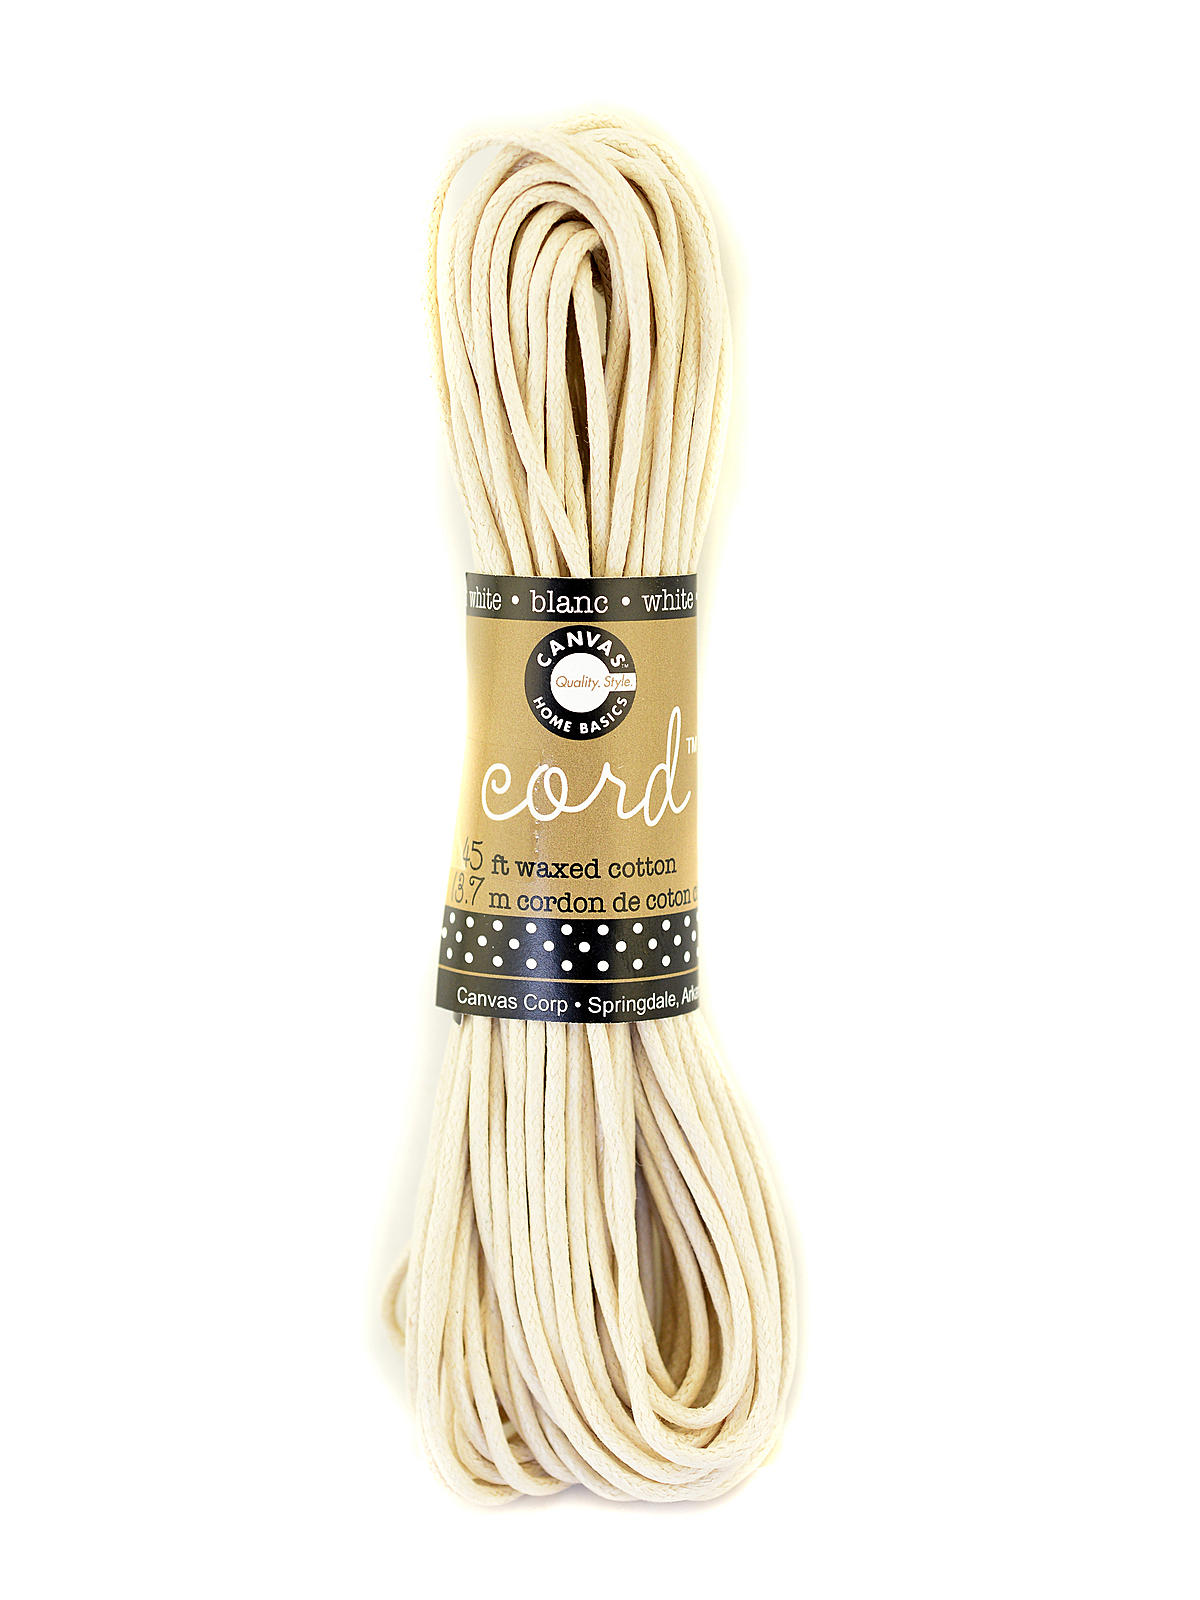 Cord Hanks Waxed Cotton 45 Ft. White